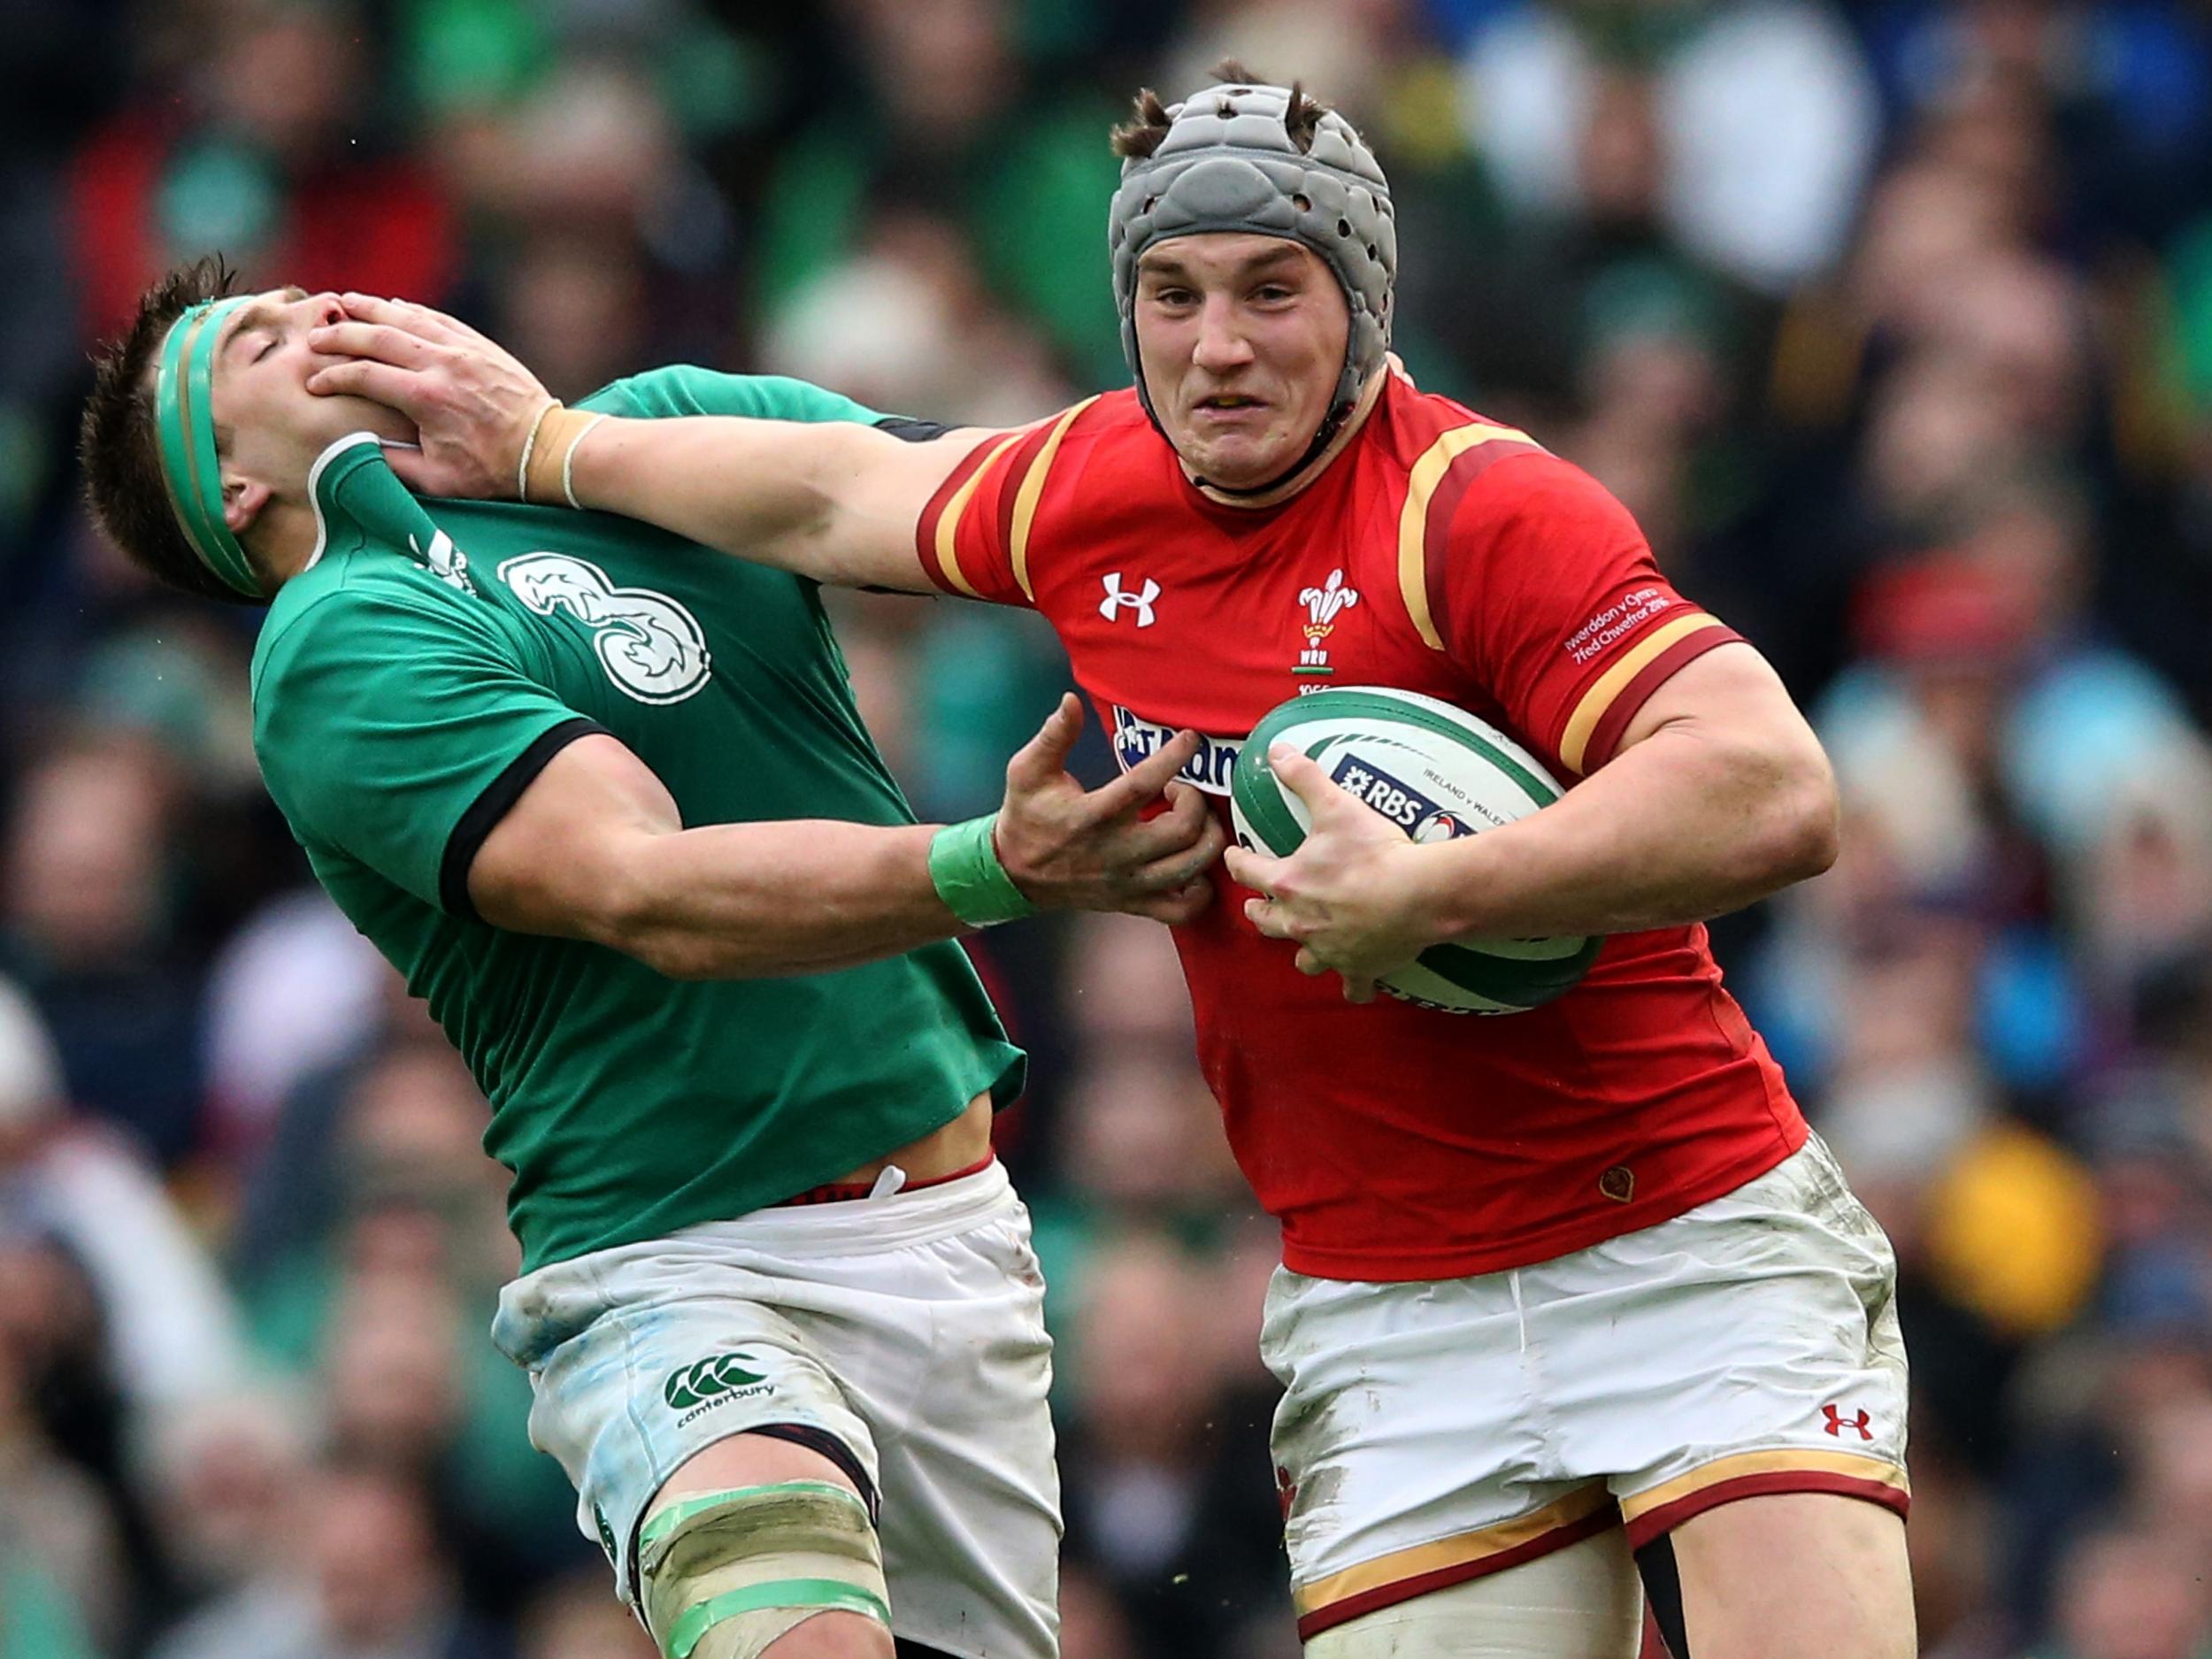 Jonathan Davies gives a big hand off to CJ Stander - both of whom will be playing on Friday night